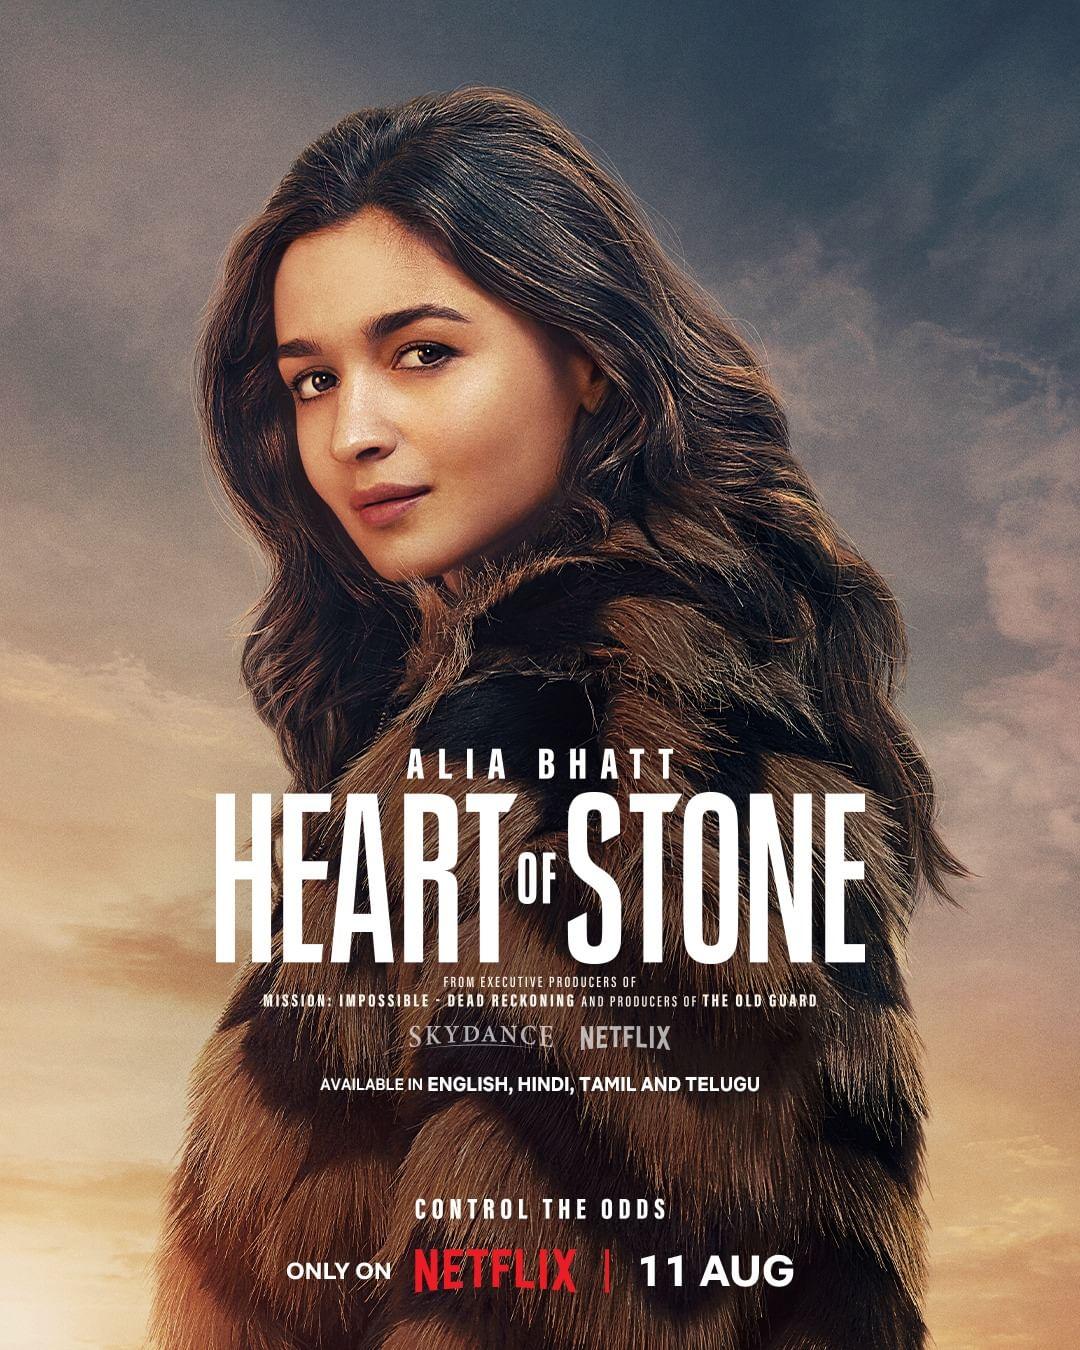 Heart of Stone (Netflix): Heart of Stone is a high-octane action-thriller that embarks on a thrilling globetrotting adventure. The central character, Rachel Stone (portrayed by Gal Gadot), works for a secretive global peacekeeping agency called The Charter. Living an anonymous life, Rachel's world is upended when a vital and deadly weapon known as 